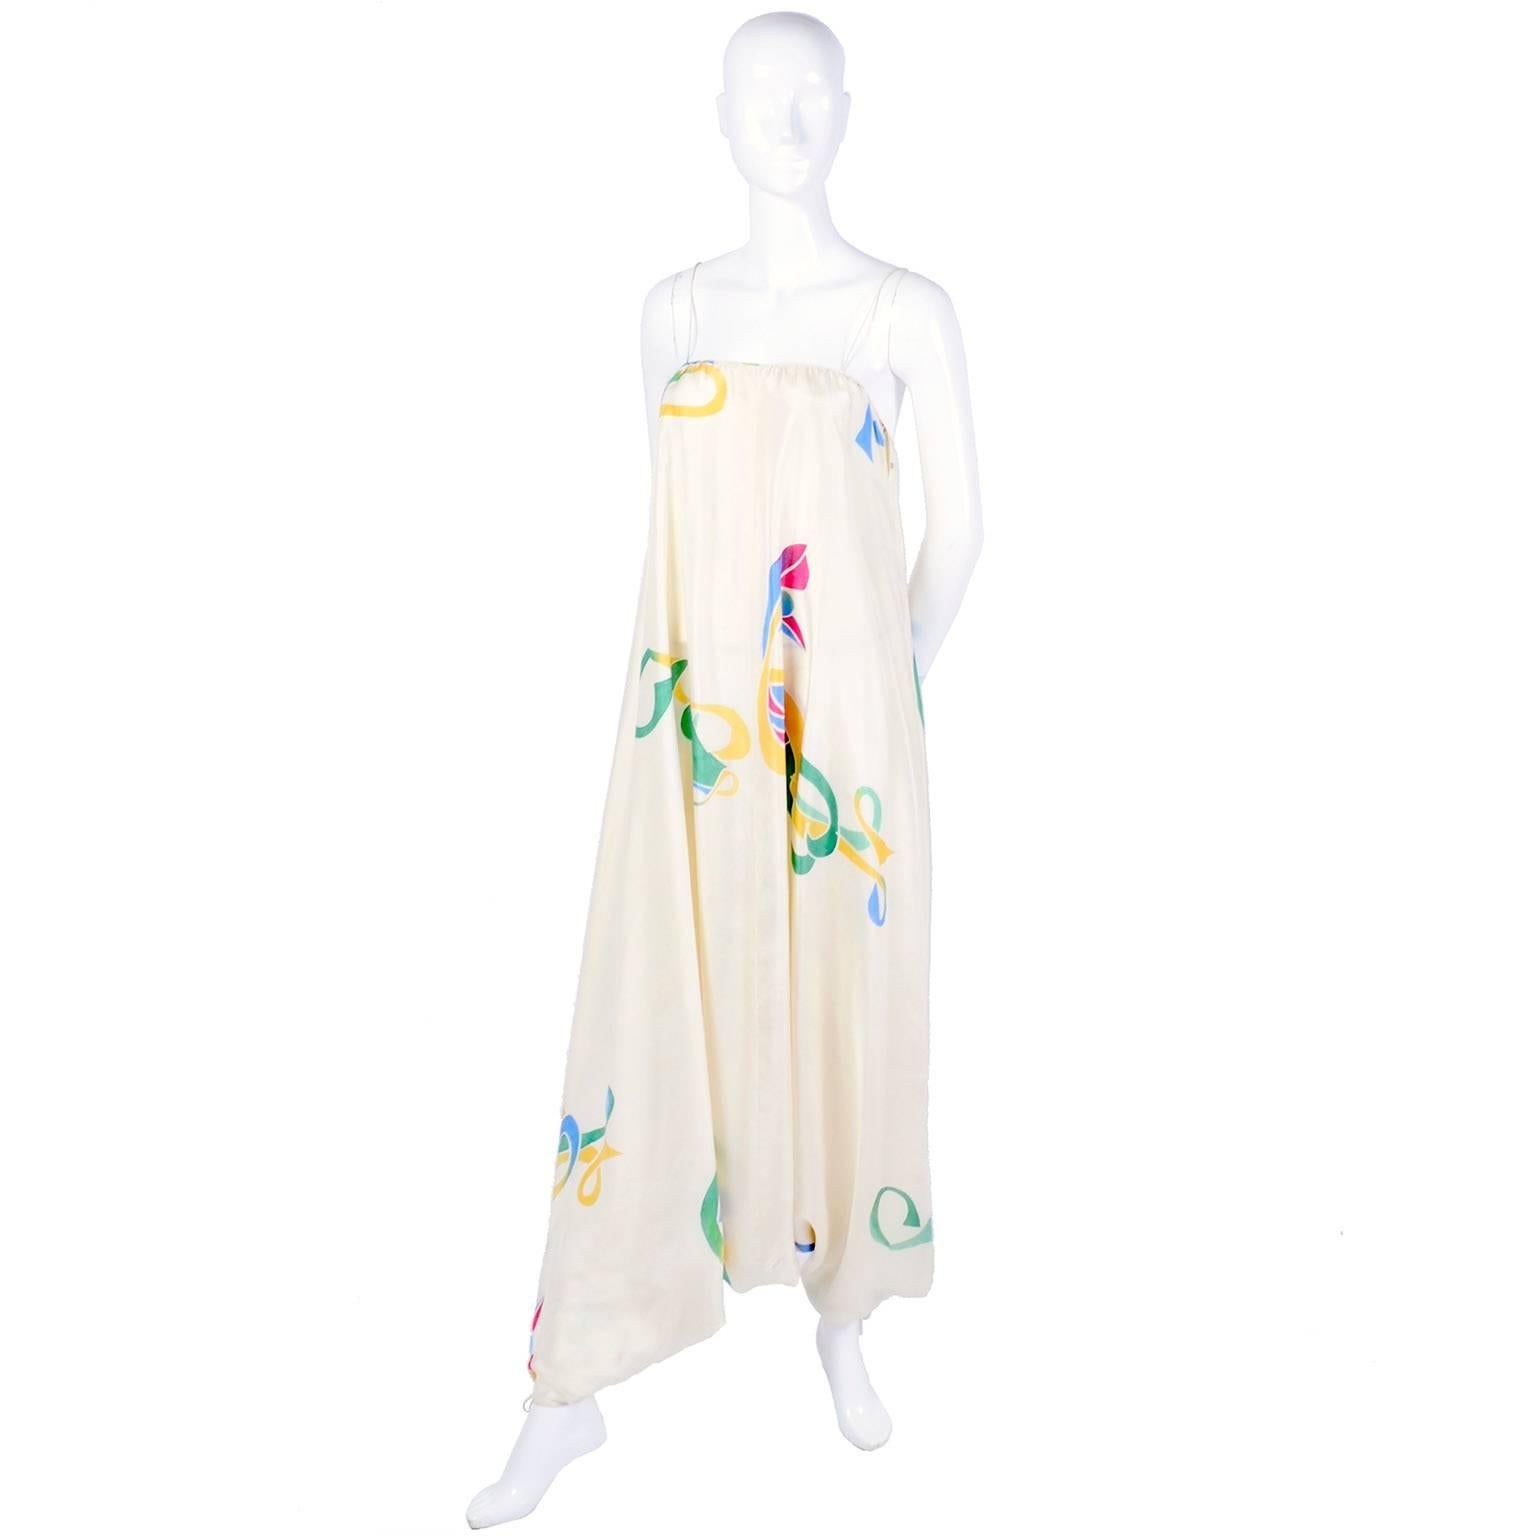 This rare, outstanding hand painted vintage silk jumpsuit was designed by Mary McFadden in the 1970's.  This silk, harem style jumpsuit has spaghetti straps and would be a perfect dress alternative for either day or evening.. The beautiful cream